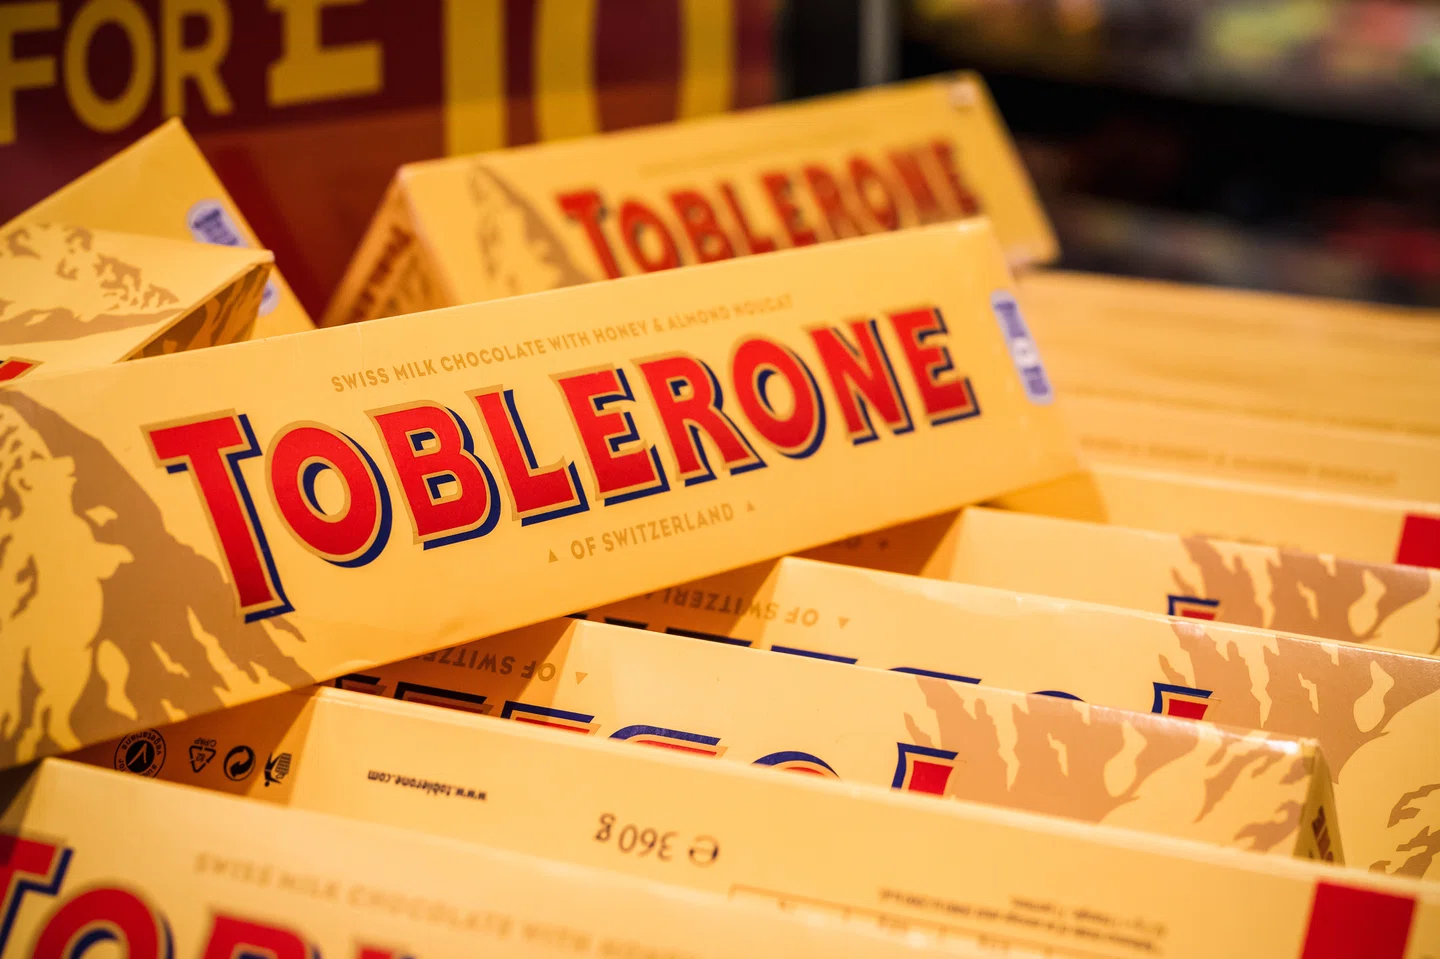 Toblerone to use “streamlined” logo after it loses iconic Swiss